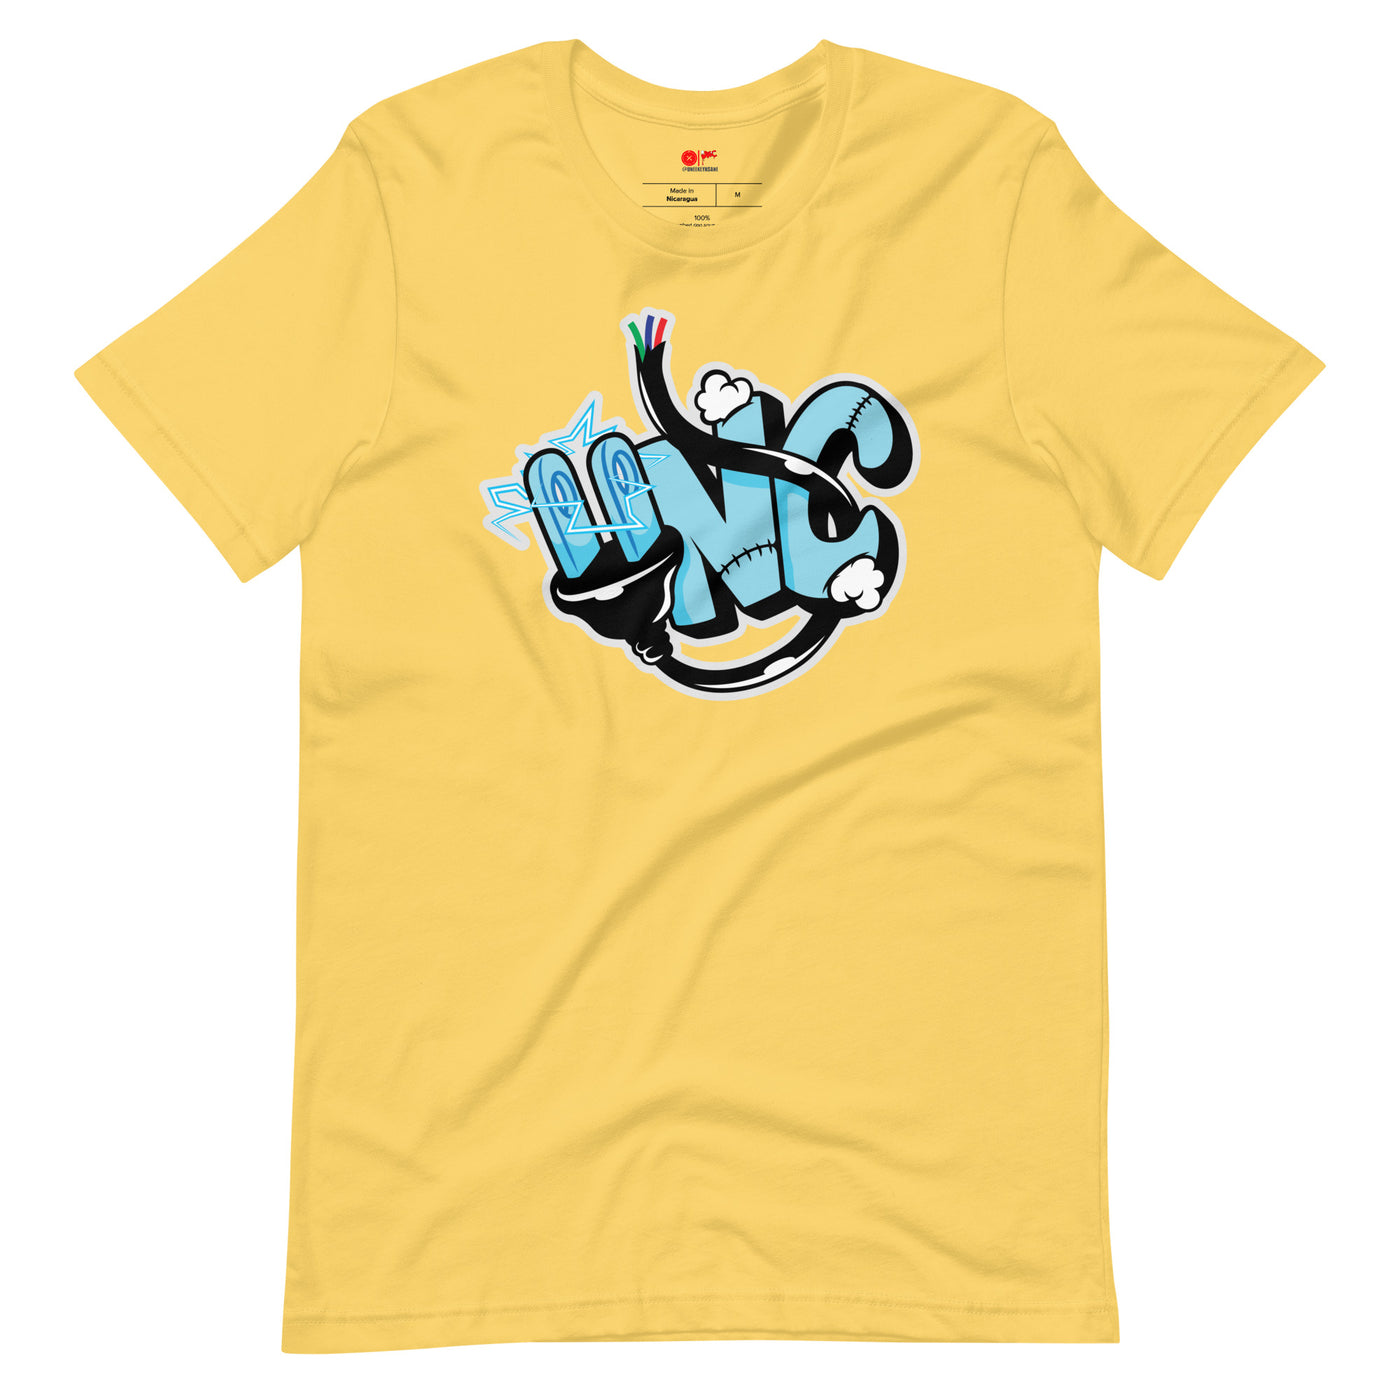 UNC Plug In T-shirt (Carolina Blue) - Unique Sweatsuits, hats, tees, shorts, hoodies, Outwear & accessories online | Uneekly Nsane